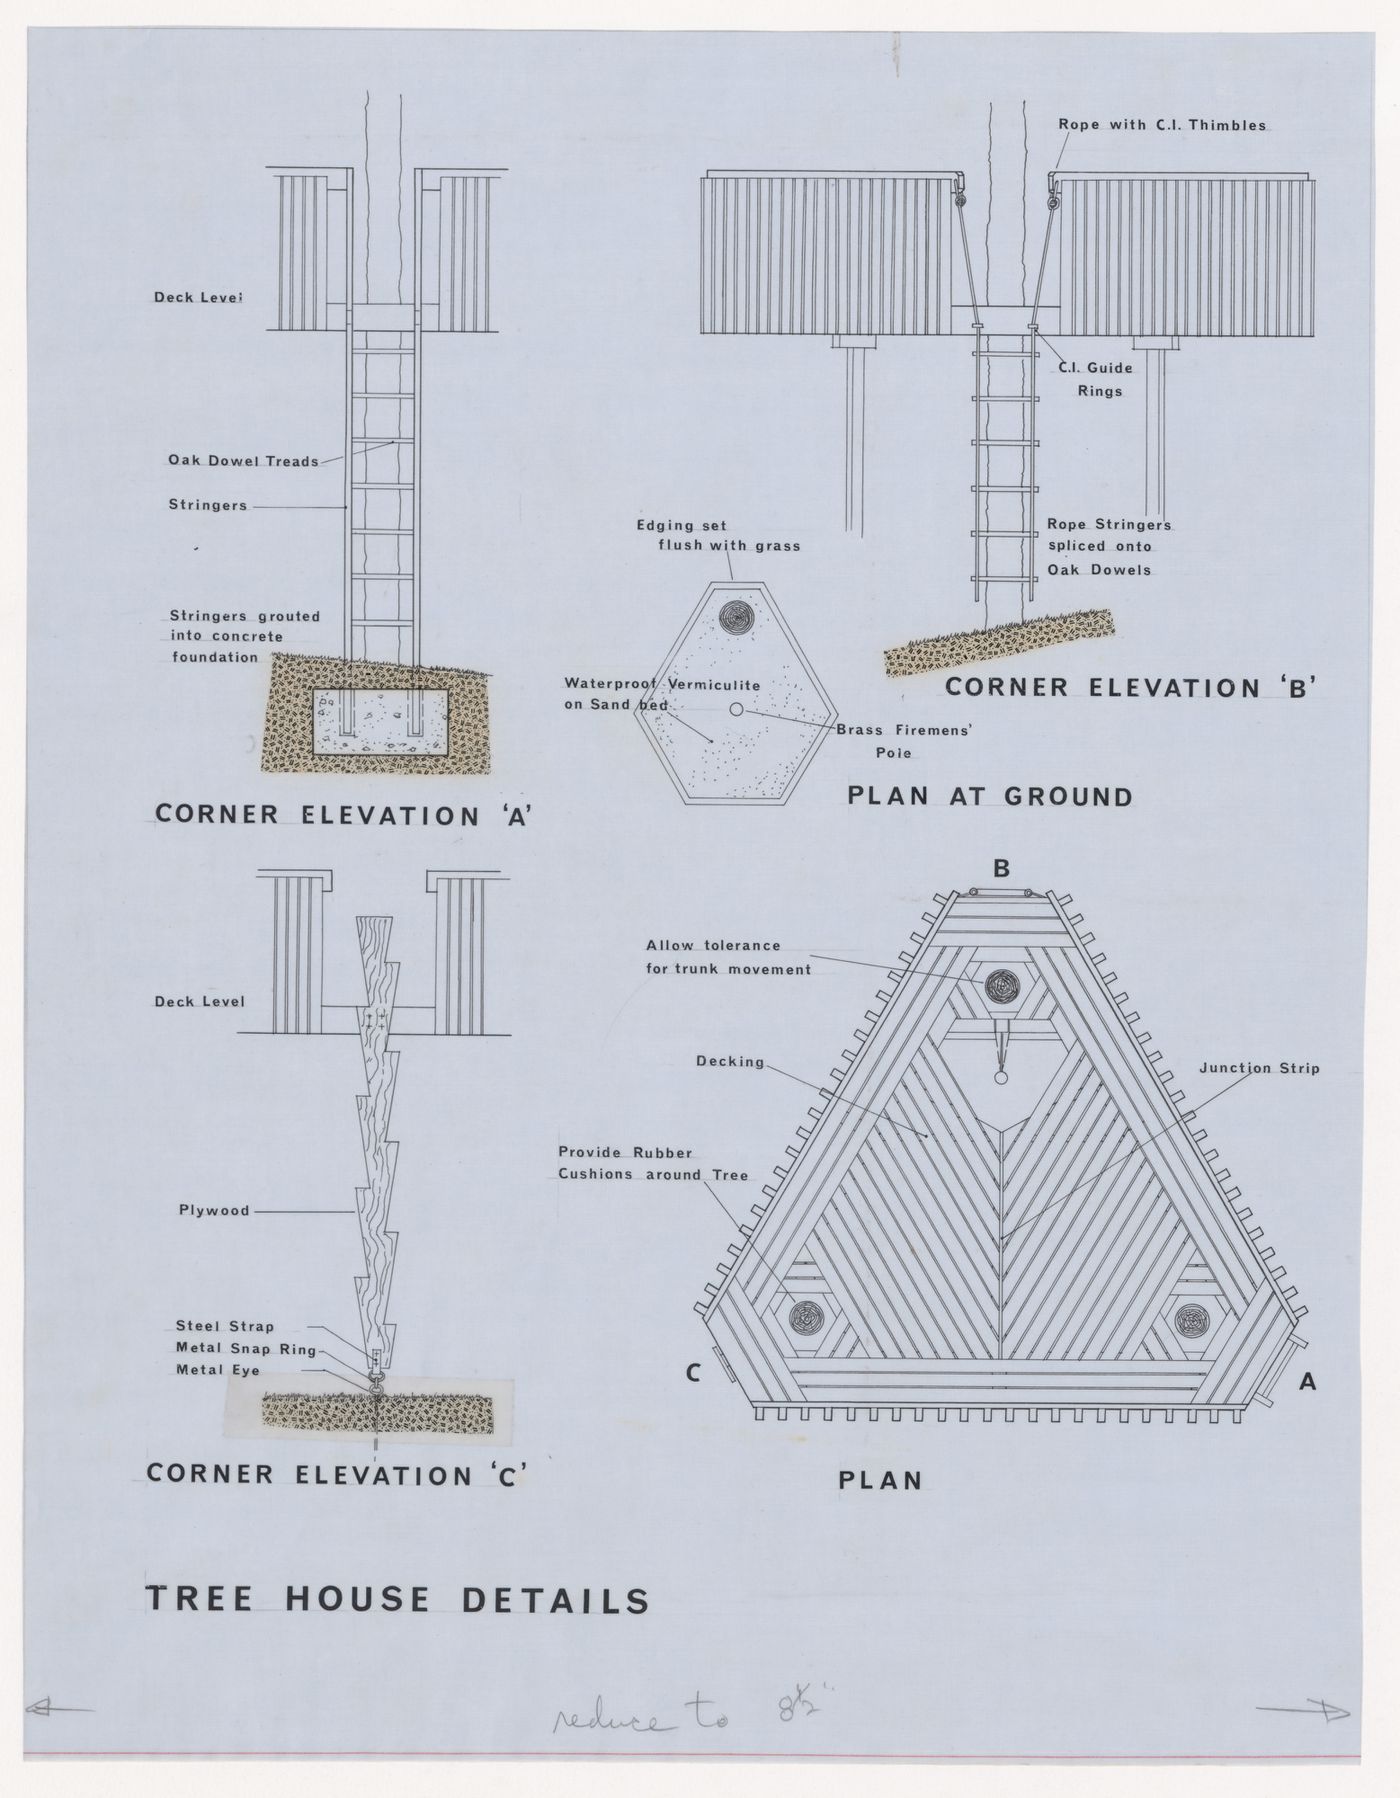 Plan and elevations for tree house for Children's Creative Centre Playground, Canadian Federal Pavilion, Expo '67, Montréal, Québec